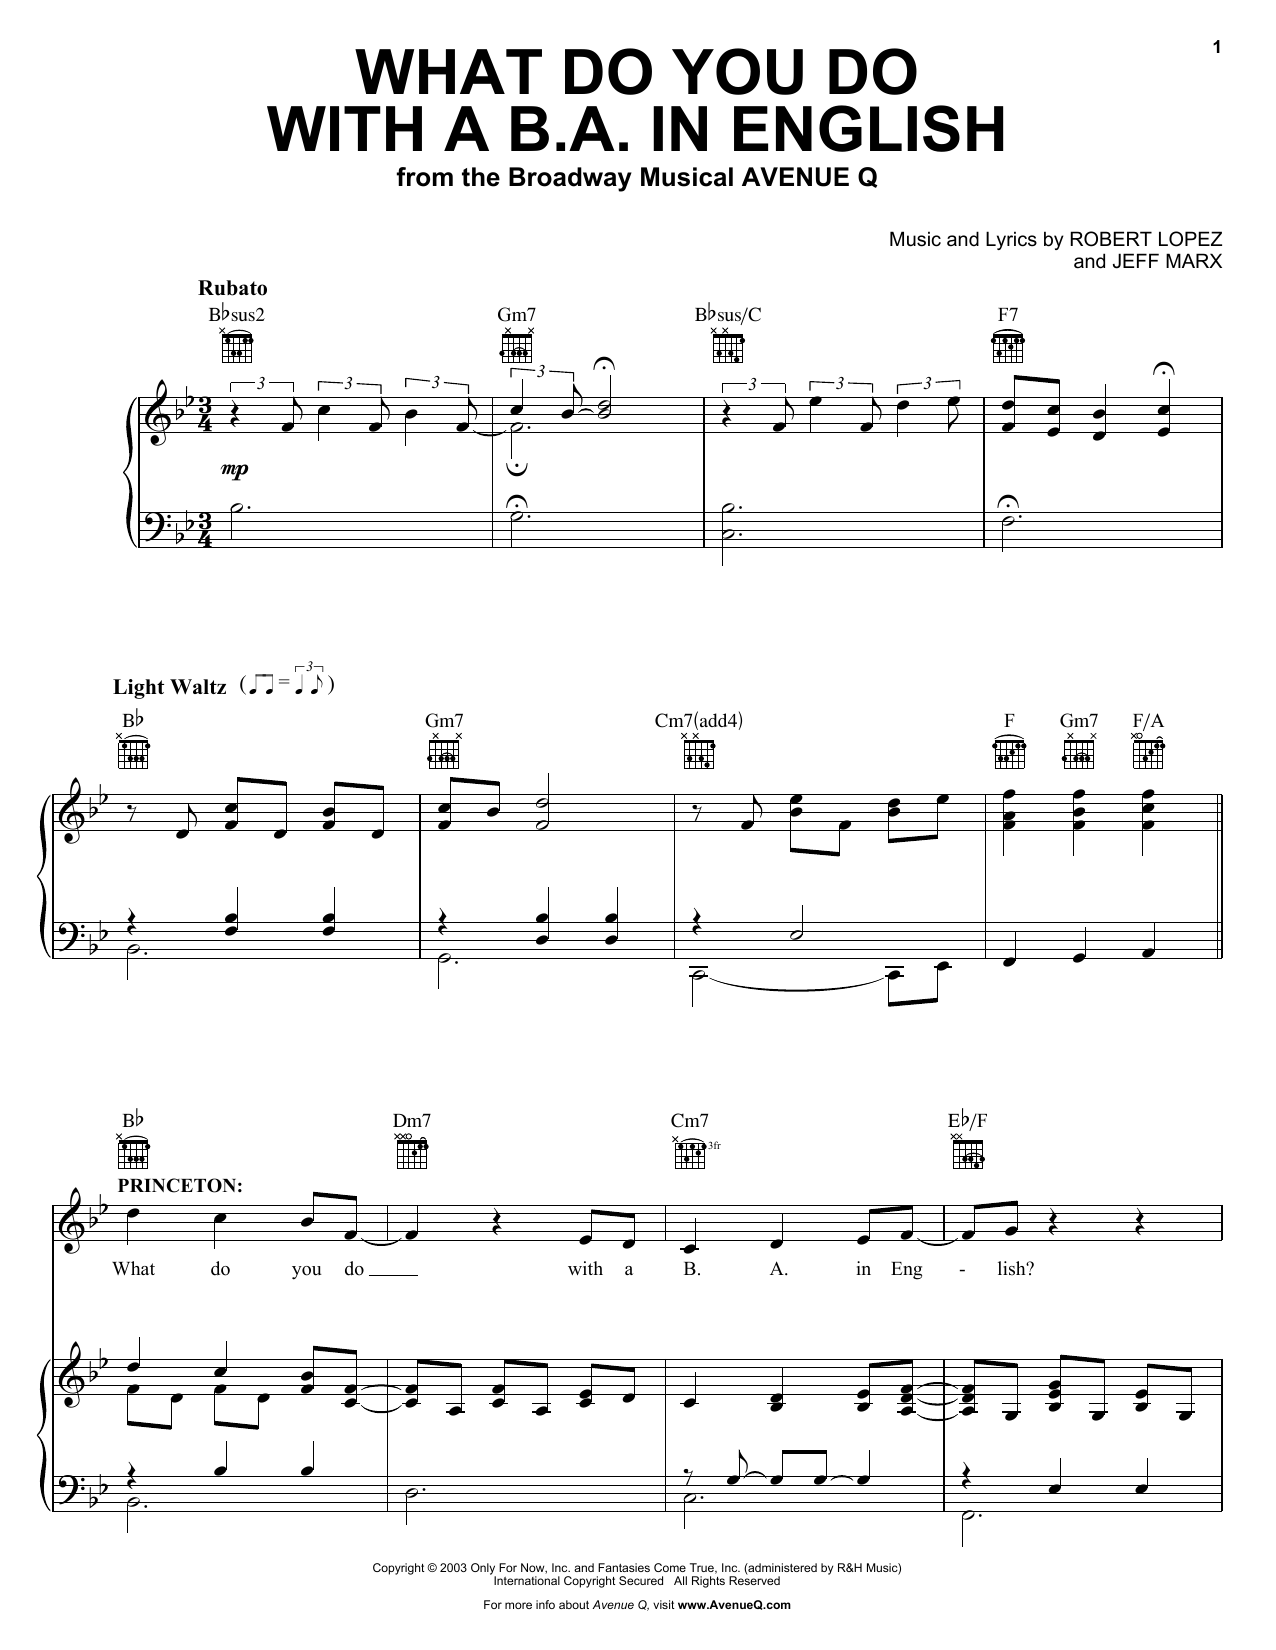 Download Robert Lopez & Jeff Marx What Do You Do With A B.A. In English ( Sheet Music